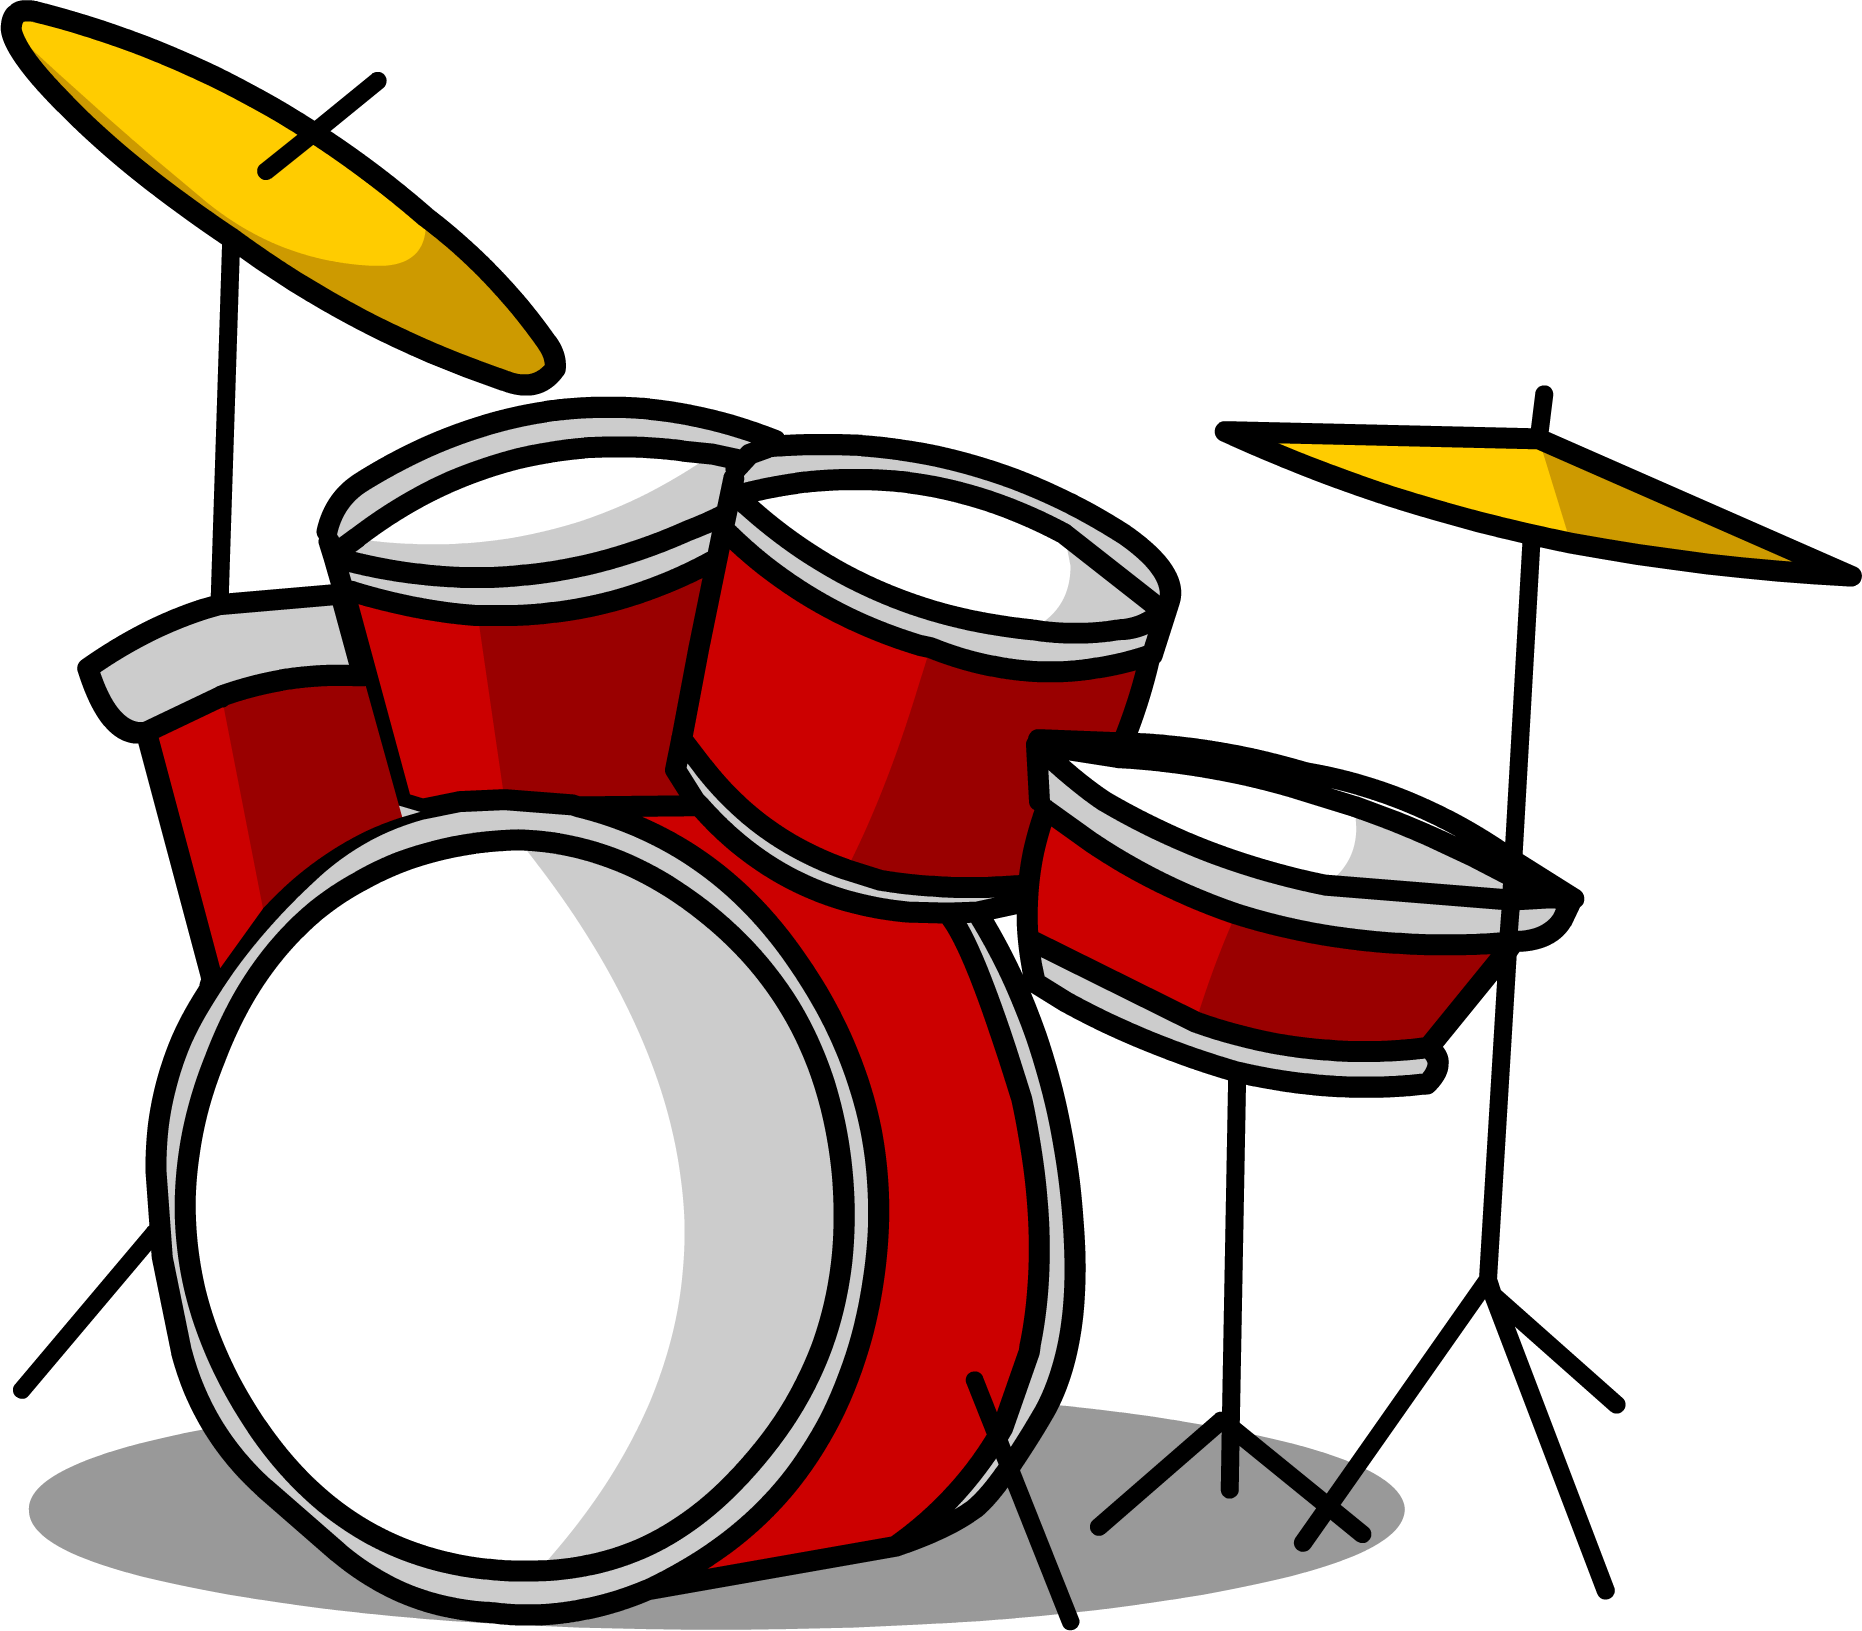 Image - Drum Kit sprite 004.png | Club Penguin Wiki | FANDOM powered by